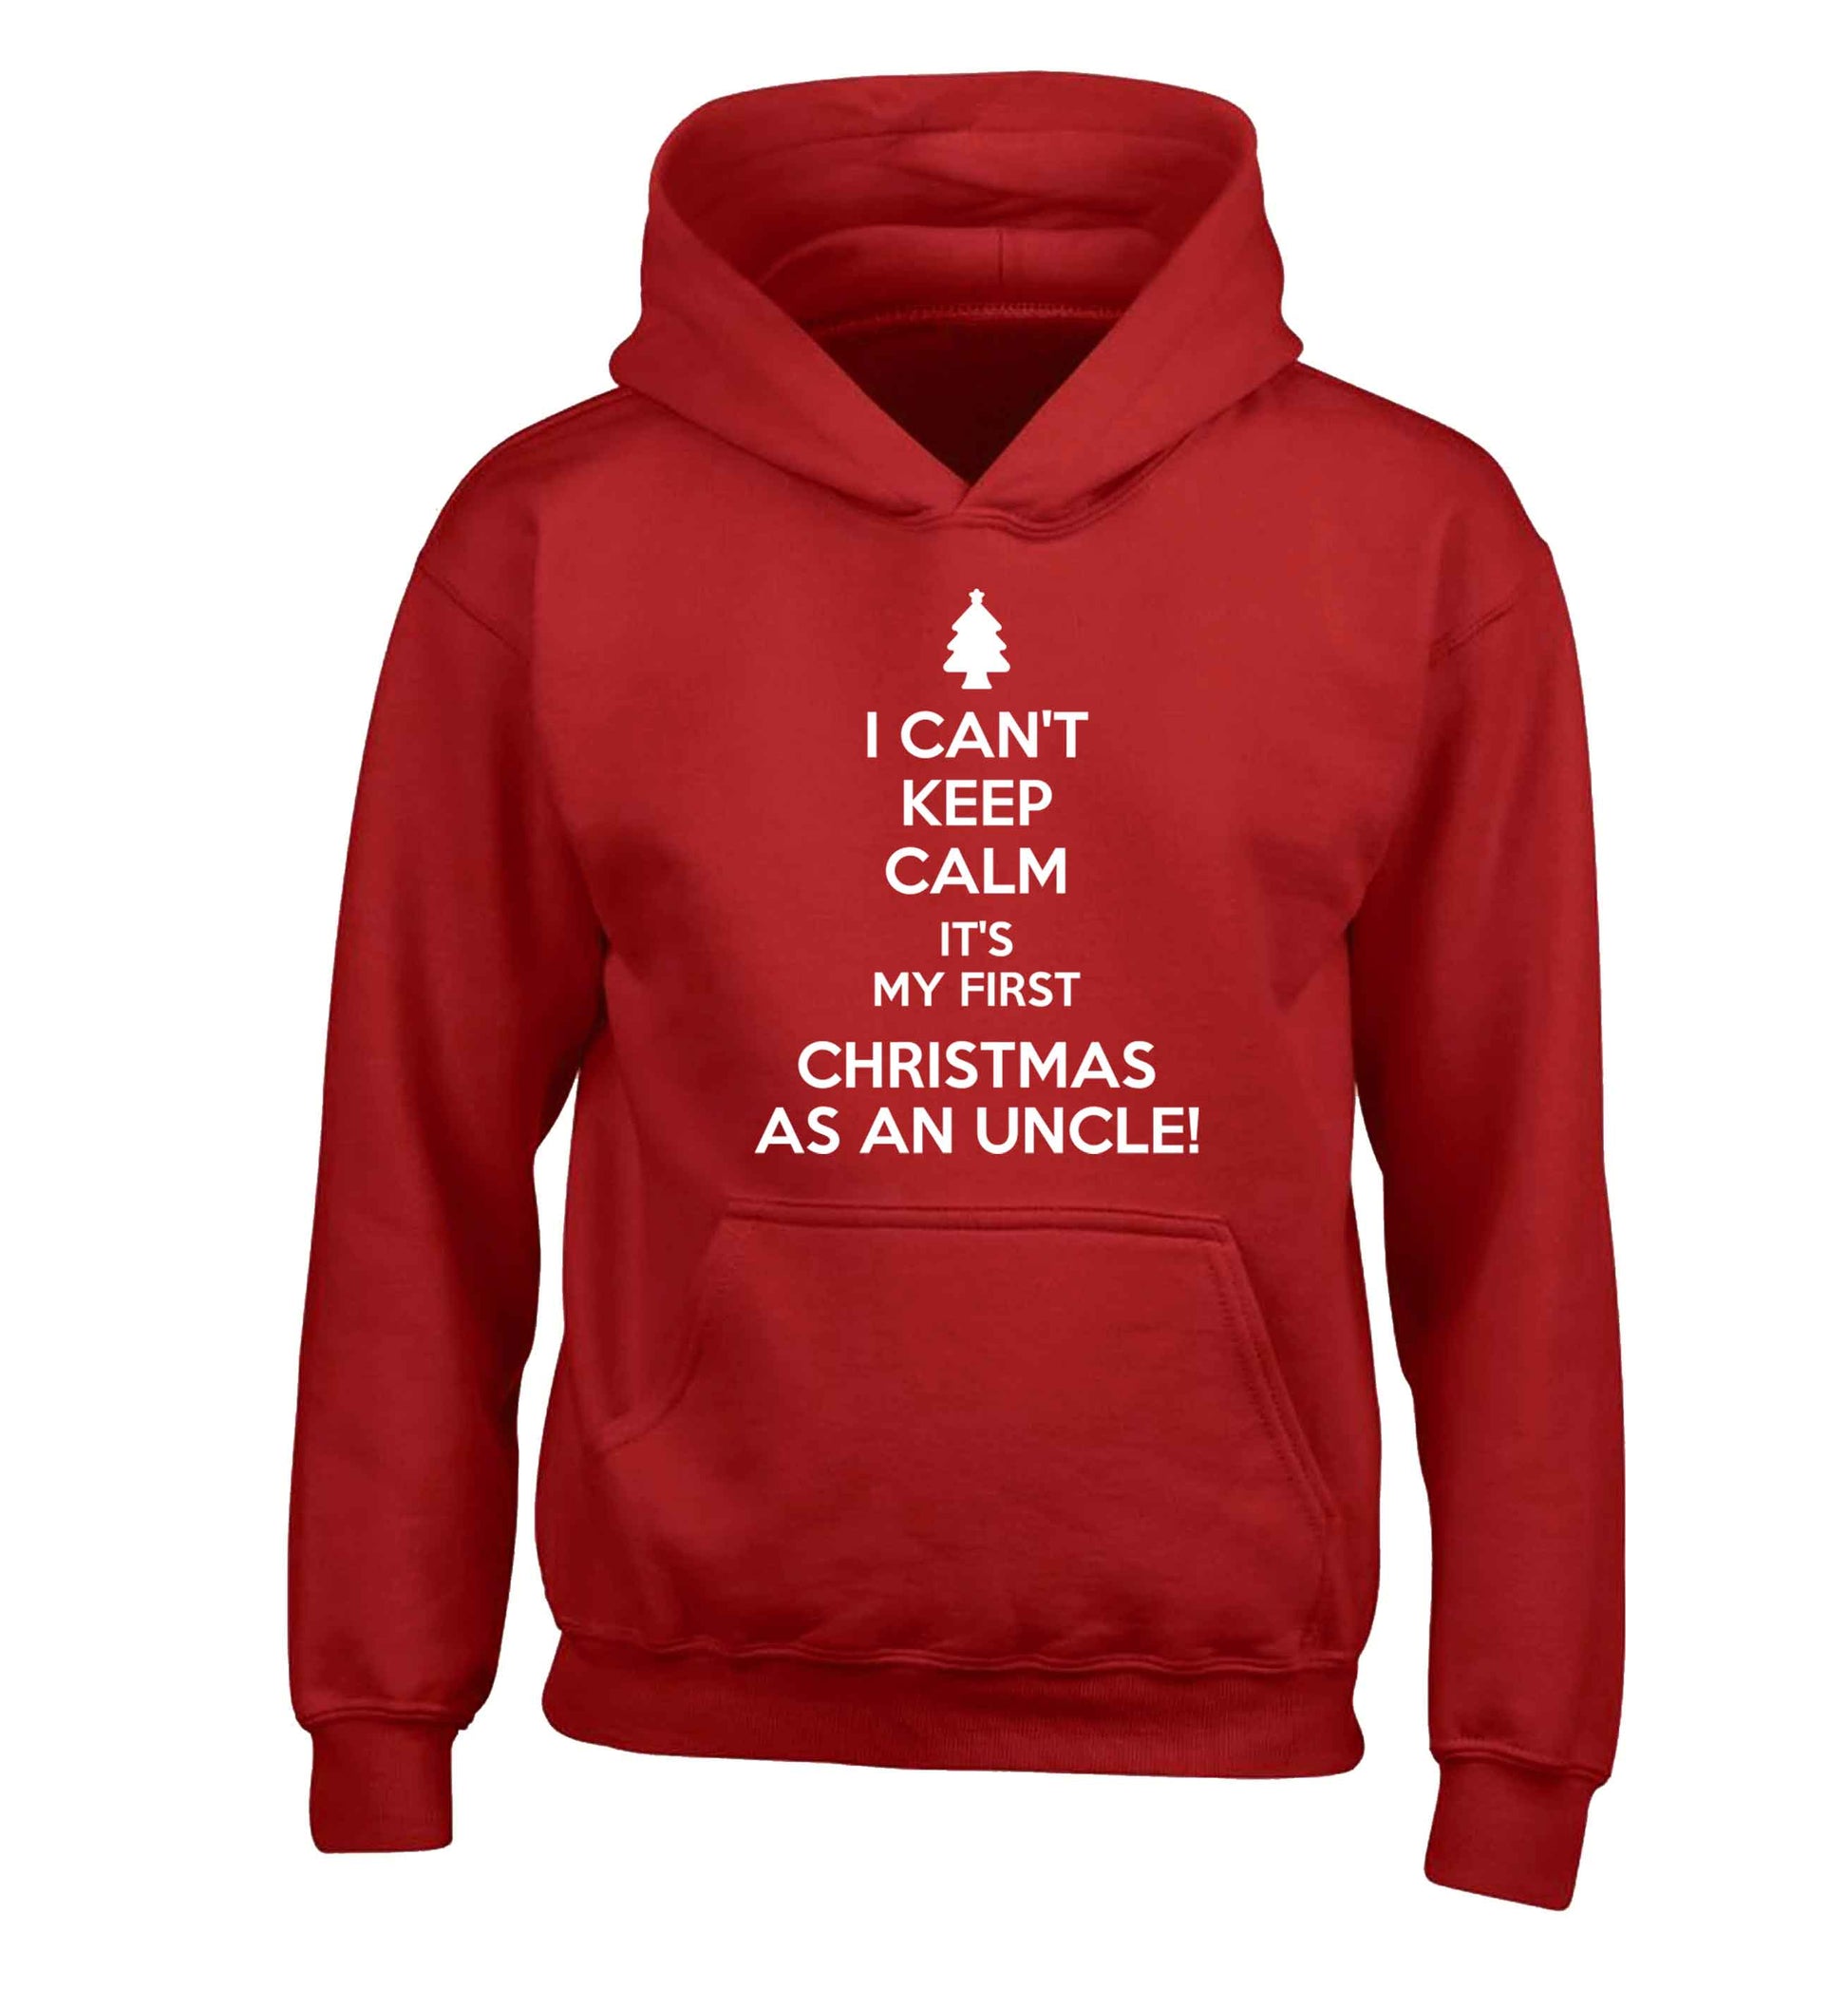 I can't keep calm it's my first Christmas as an uncle! children's red hoodie 12-13 Years